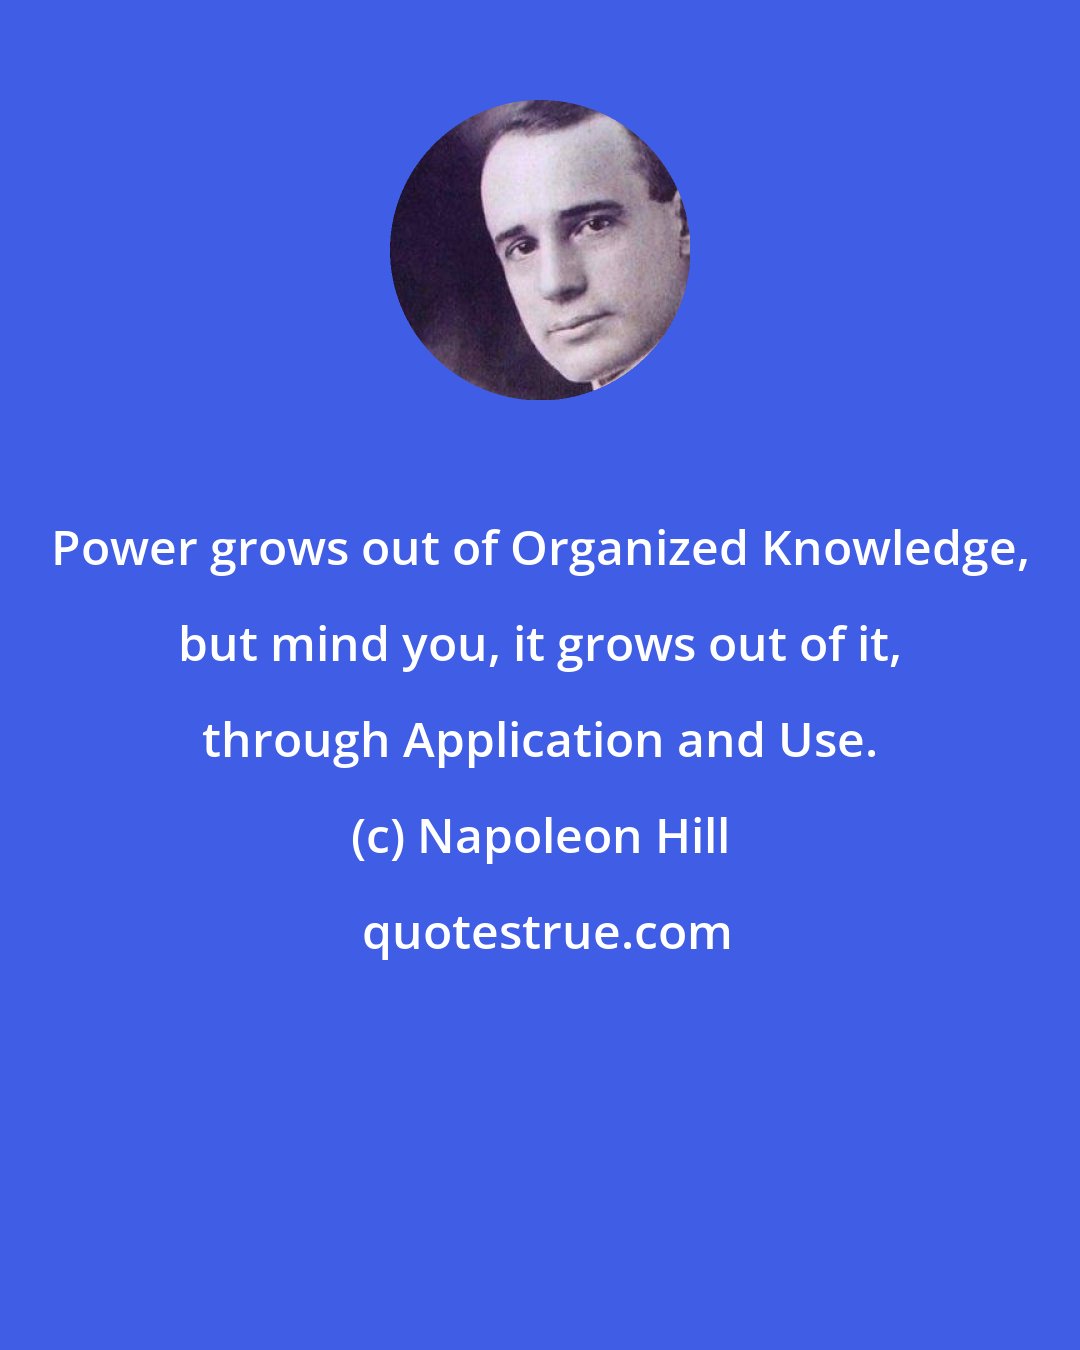 Napoleon Hill: Power grows out of Organized Knowledge, but mind you, it grows out of it, through Application and Use.